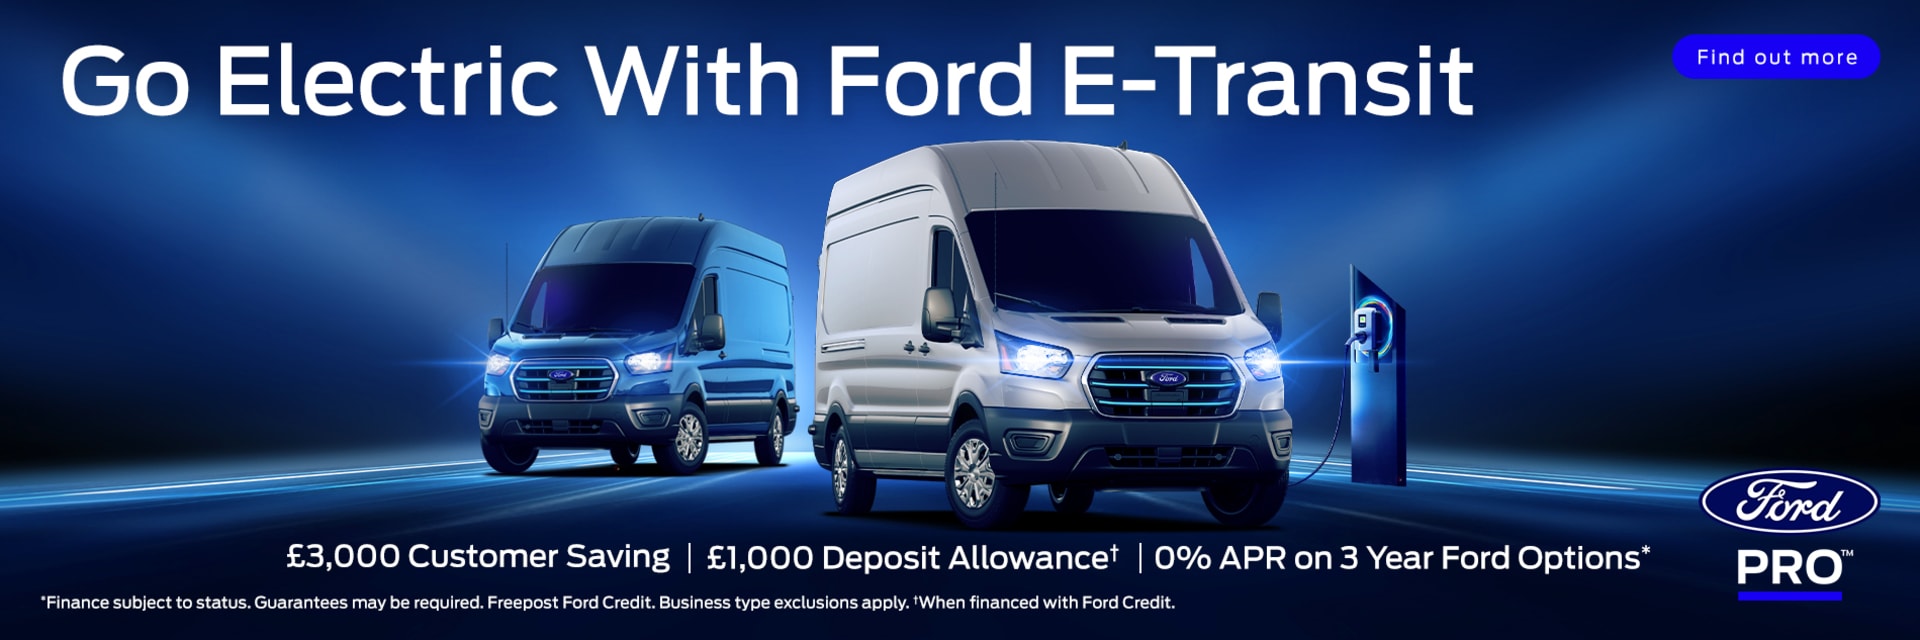 ALL-NEW FORD E-TRANSIT